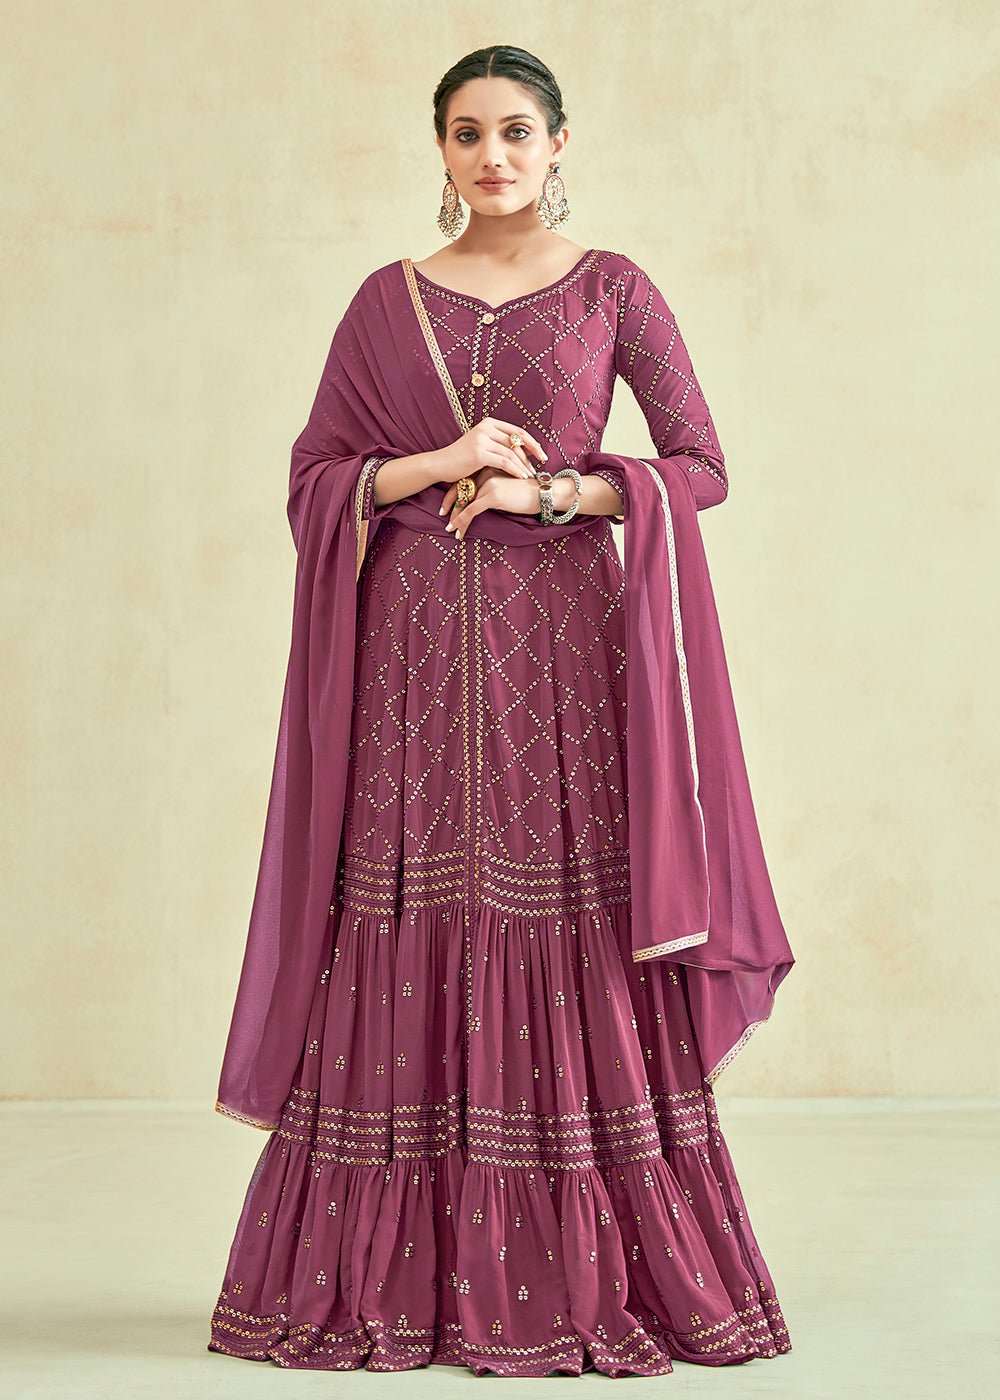 Buy Now Mauve Real Georgette with Sequins Wedding Festive Gown Online in USA, UK, Australia, Canada & Worldwide at Empress Clothing.